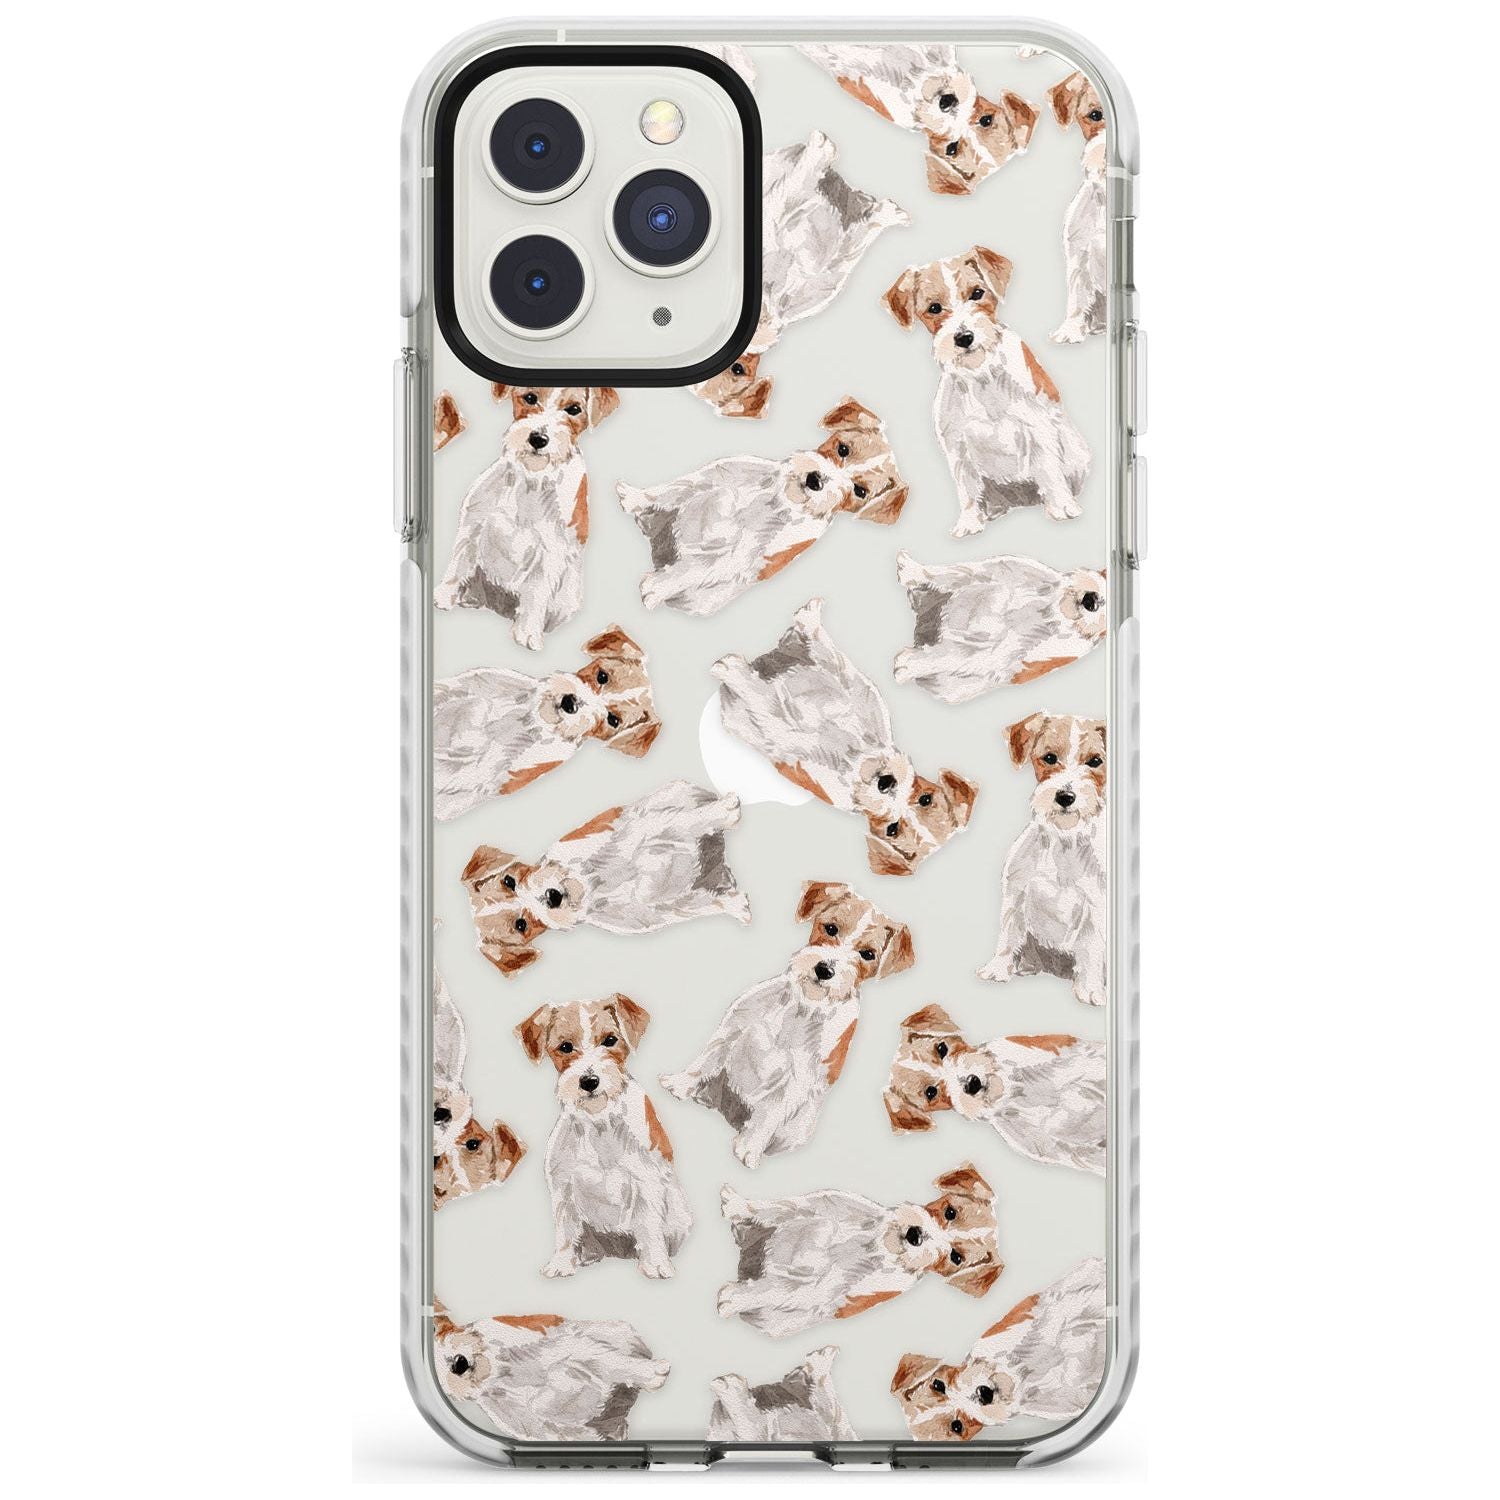 Wirehaired Jack Russell Watercolour Dog Pattern Impact Phone Case for iPhone 11 Pro Max